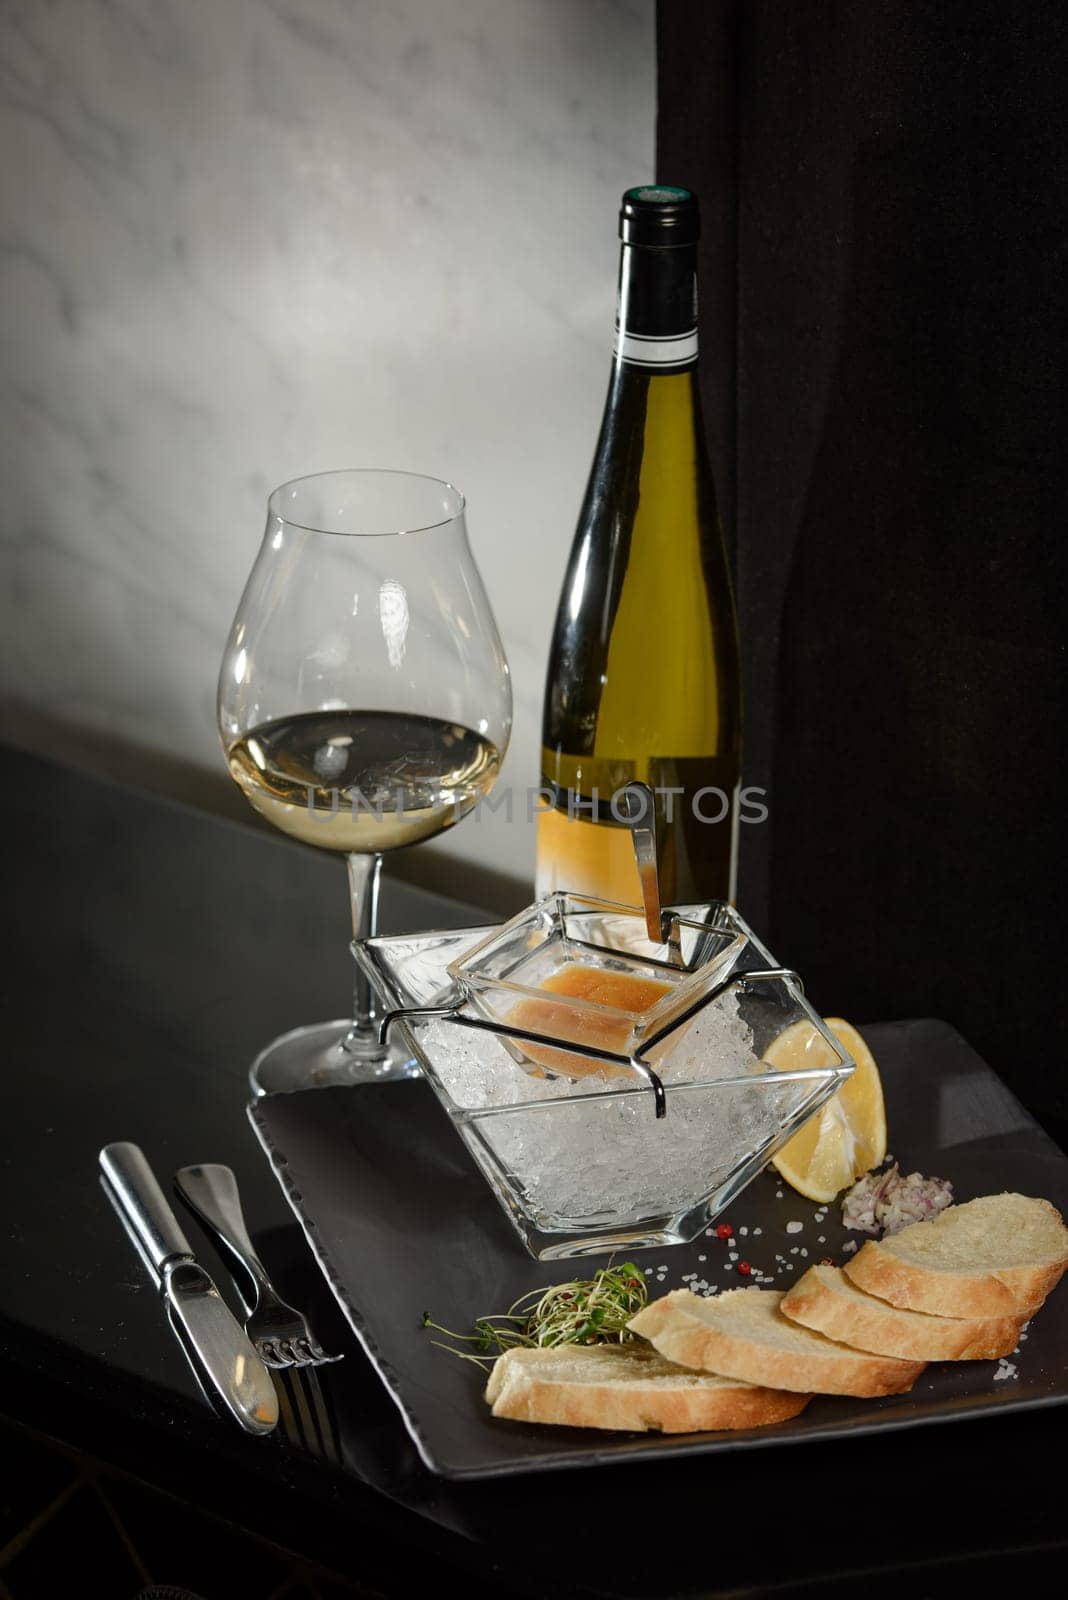 Pike fish caviar, on ice, with croutons and butter, on a transparent dish with a glass of white wine on a dark background